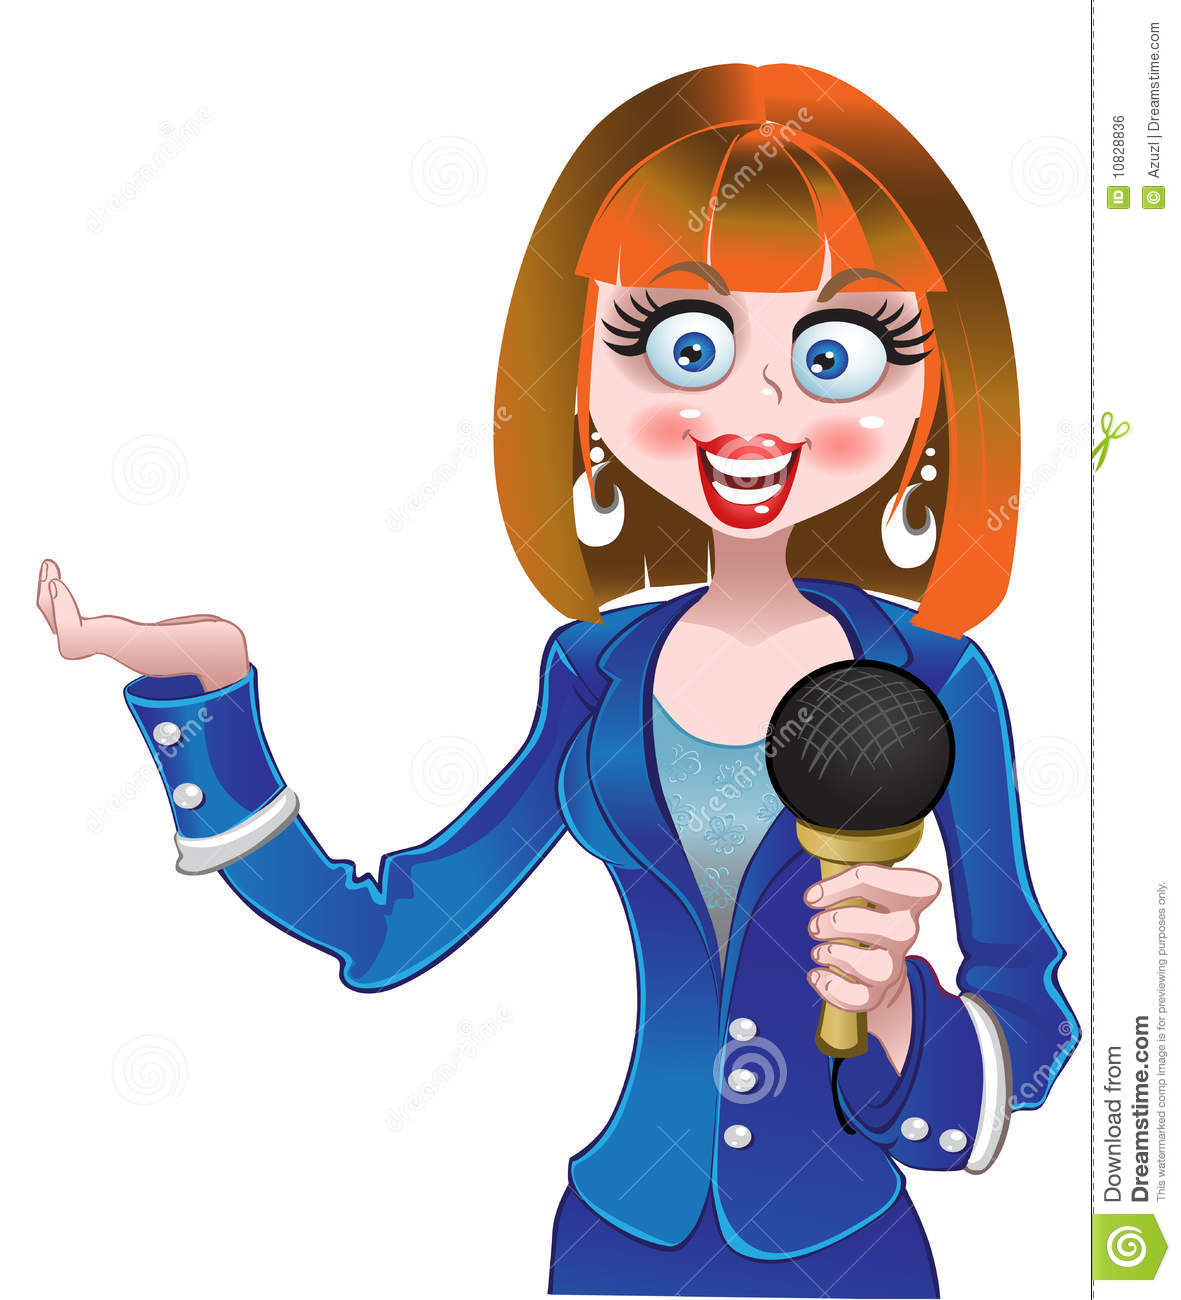 Vector Reporter Girl In Blue Suit Royalty Free Stock Image   Image    